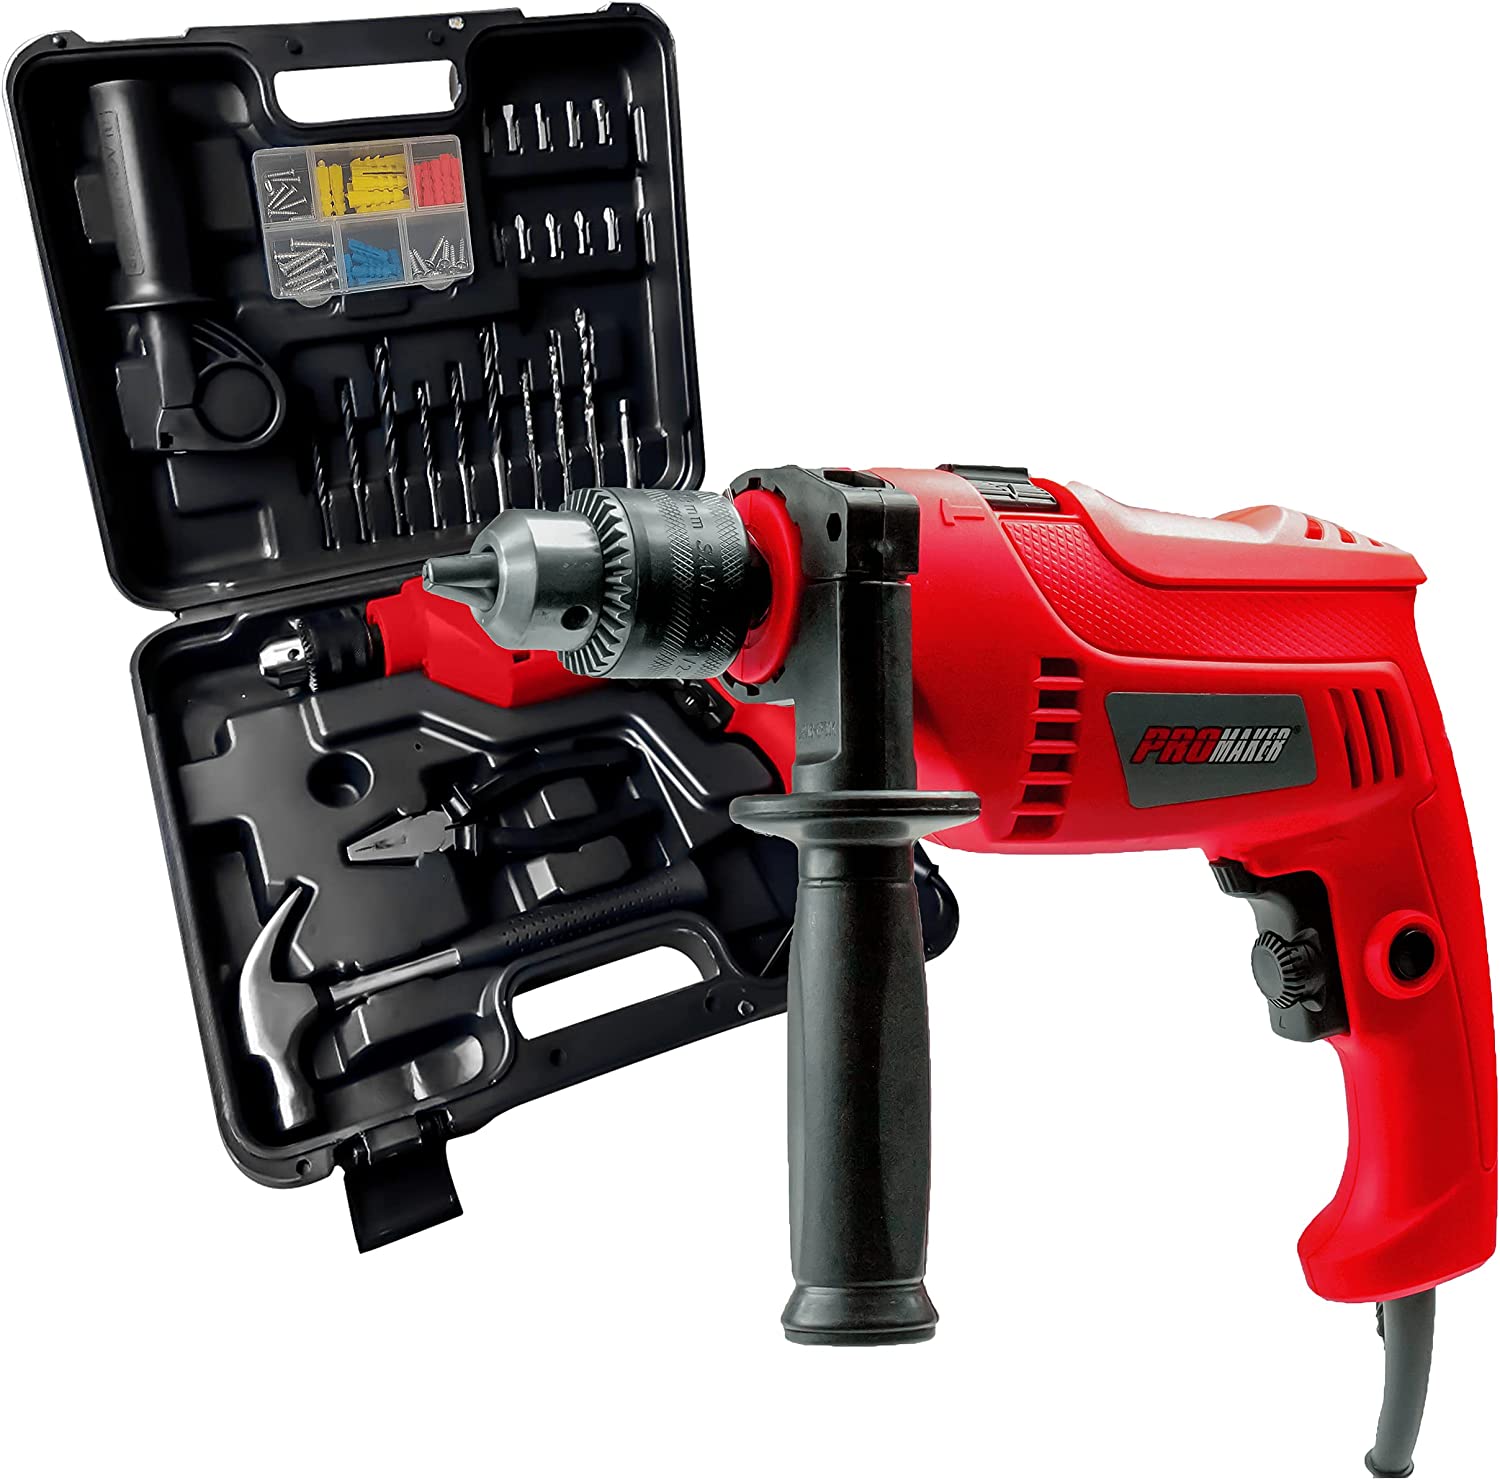 PROMAKER Hammer Drill with 88 Accesories, 1 2-inch, 5 Amp Corded Hammer Drill, Variable speed 0-3000 RPM, option to choose Drill and Hammer. PRO-TP550KIT